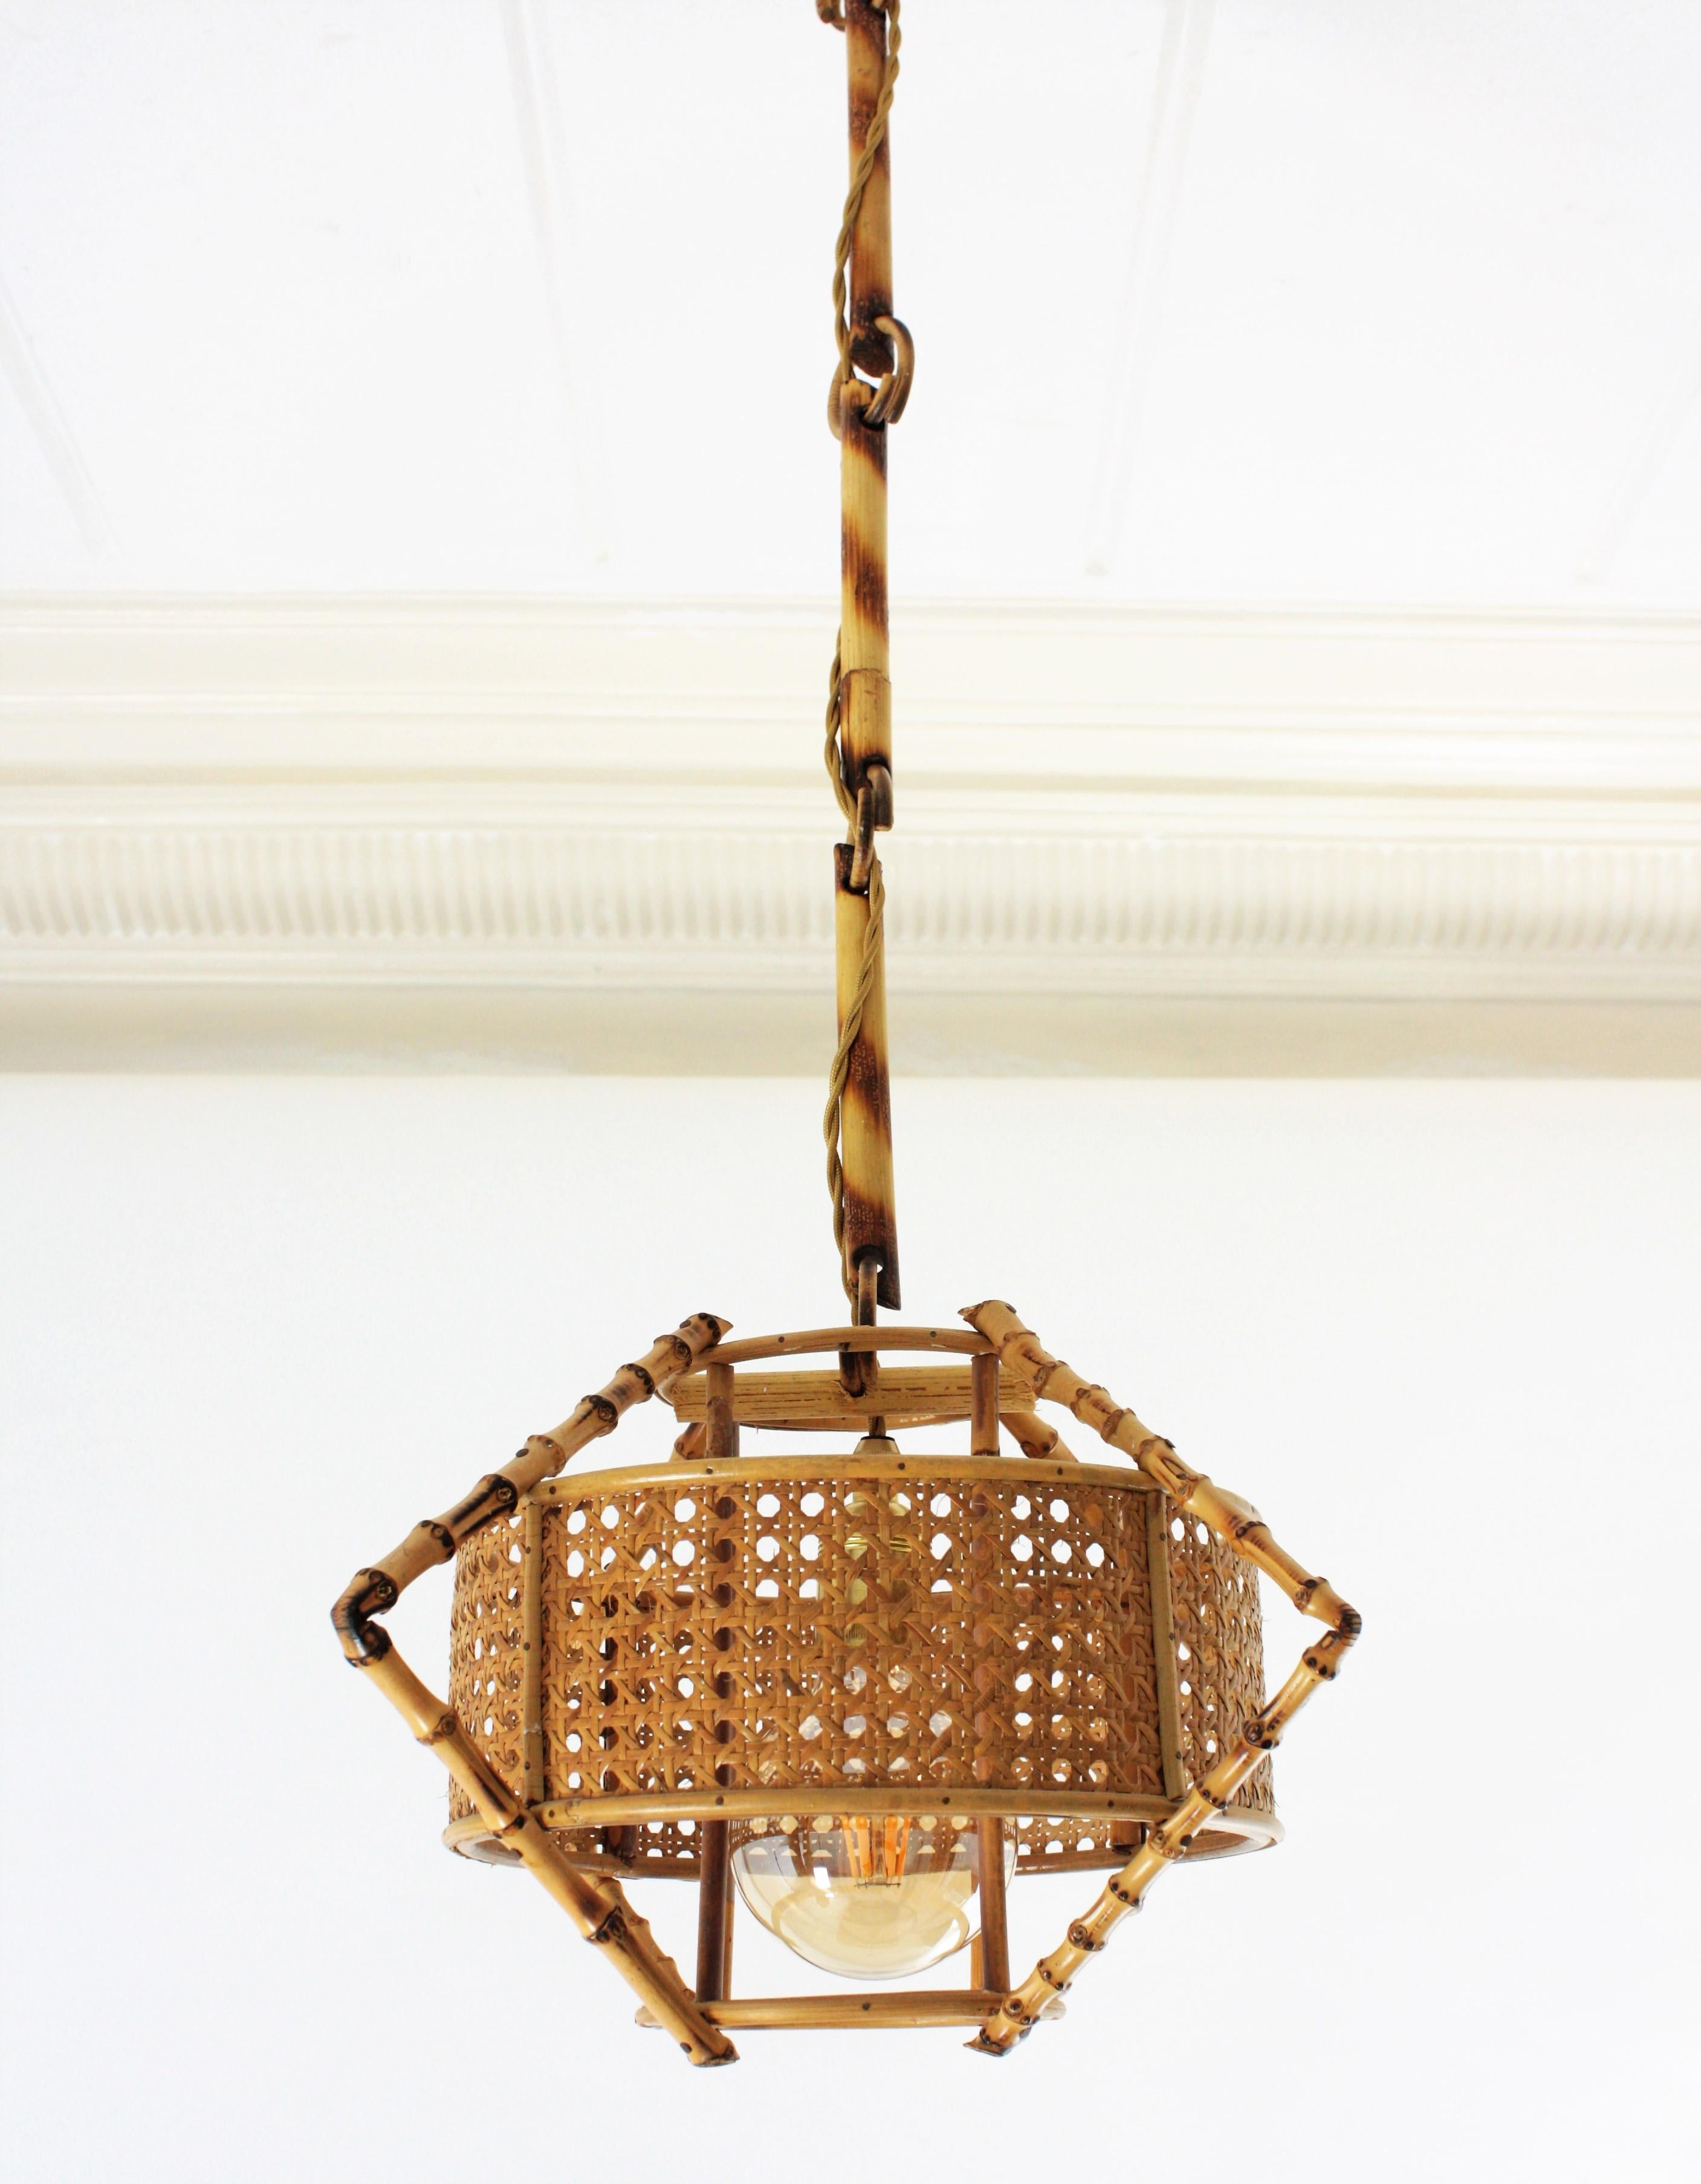 Unusual handcrafted bamboo and rattan hanging pendant lamp with a woven wicker shade. Manufactured at the Mid-Century Modern period with Tiki or oriental accents. Spain, 1950s.
This sculptural lamp combines a Midcentury taste at the woven wicker